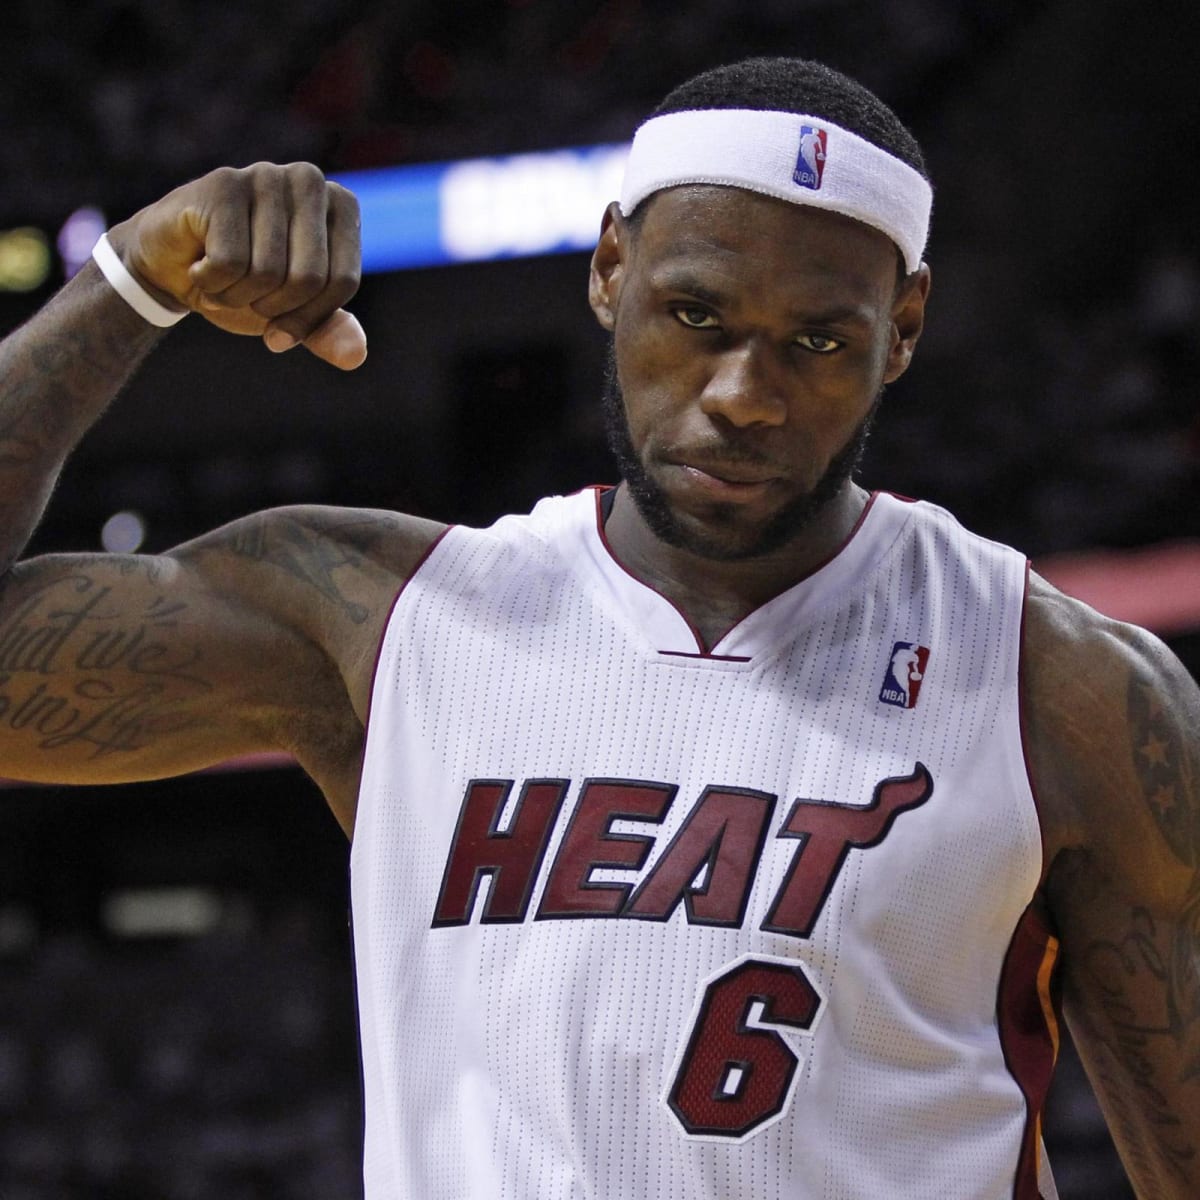 Lakers Rumors: LeBron James Changing Jersey Number from No. 23 to